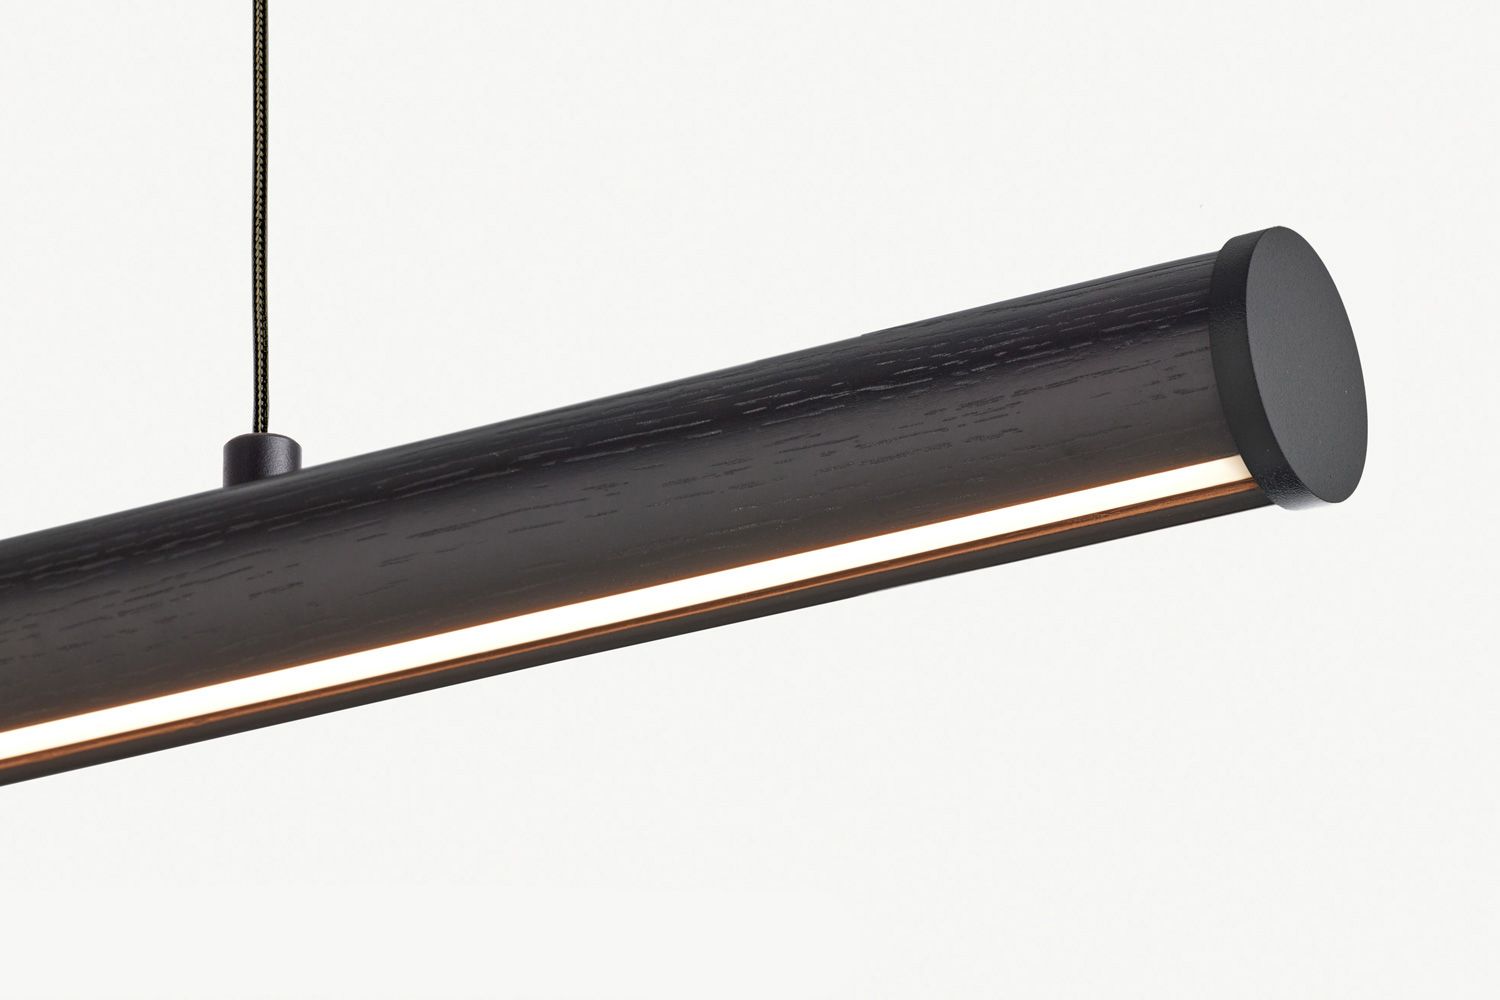 Fluxwood Roller Black Pendant. The Roller is a classic dowel pendant with a subtle curved edge to catch the LED light and create a unique gradient effect. 